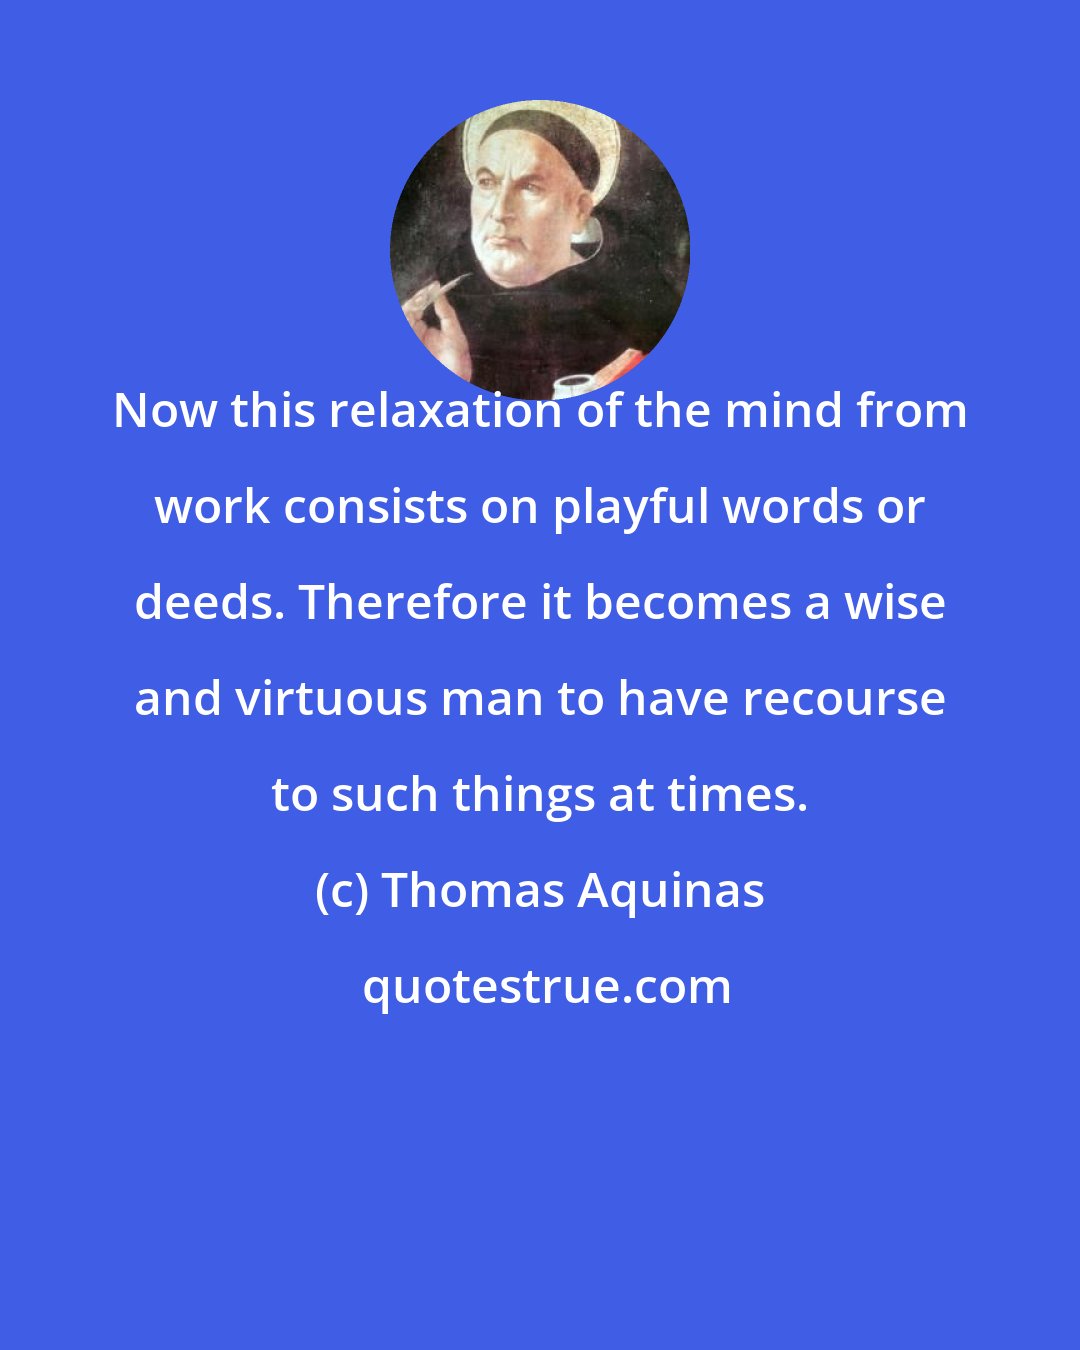 Thomas Aquinas: Now this relaxation of the mind from work consists on playful words or deeds. Therefore it becomes a wise and virtuous man to have recourse to such things at times.